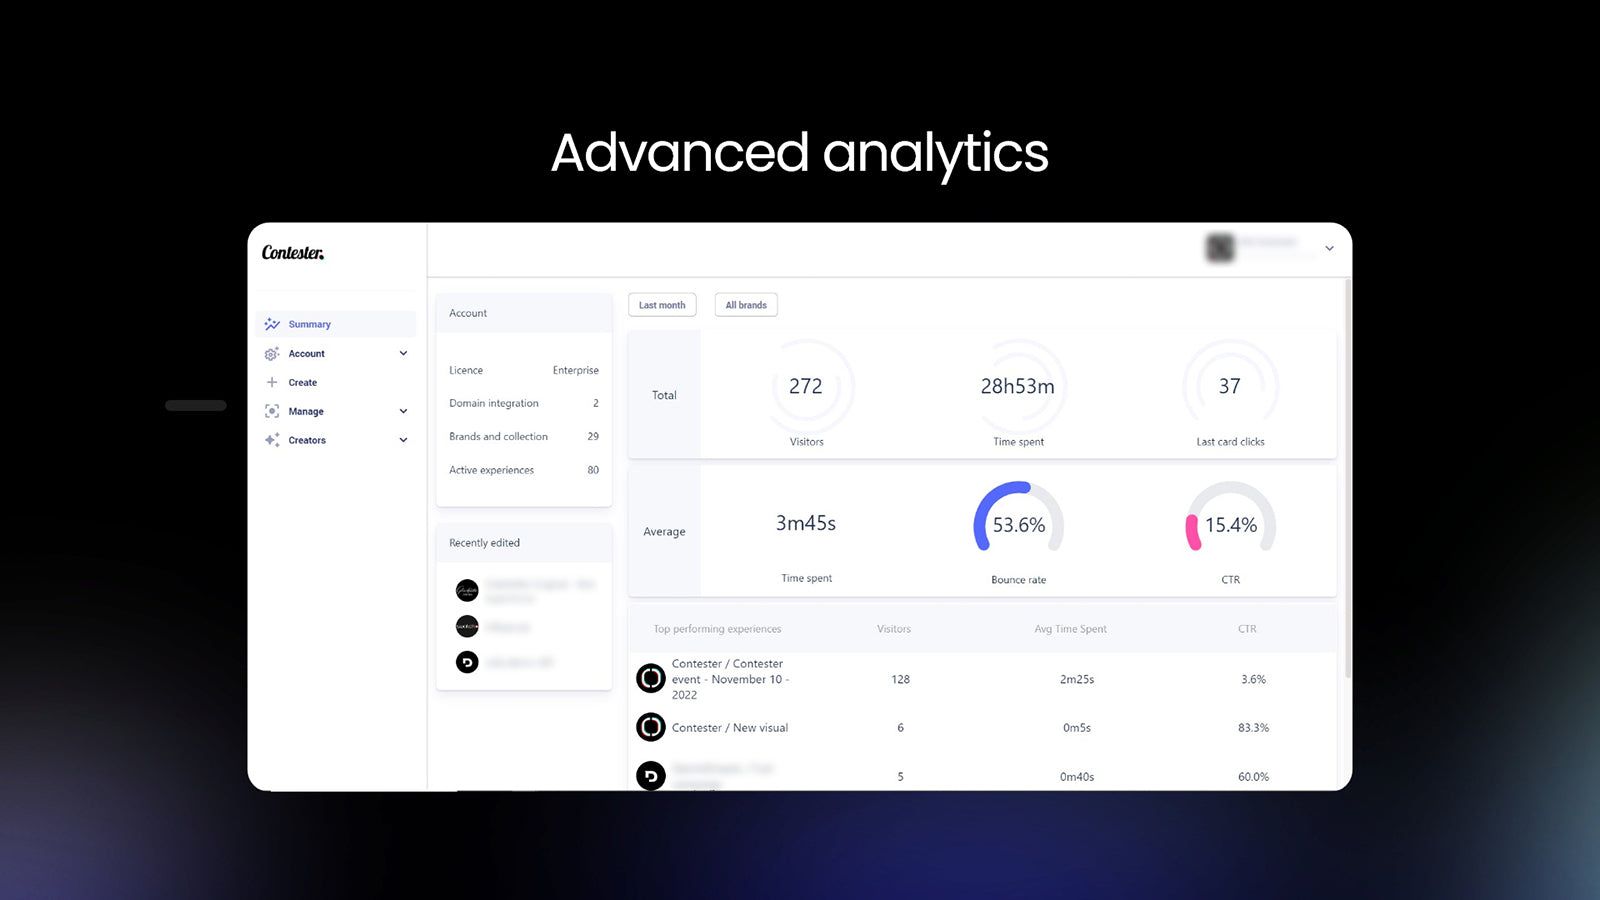 Advanced analytics per campaign and collectively  